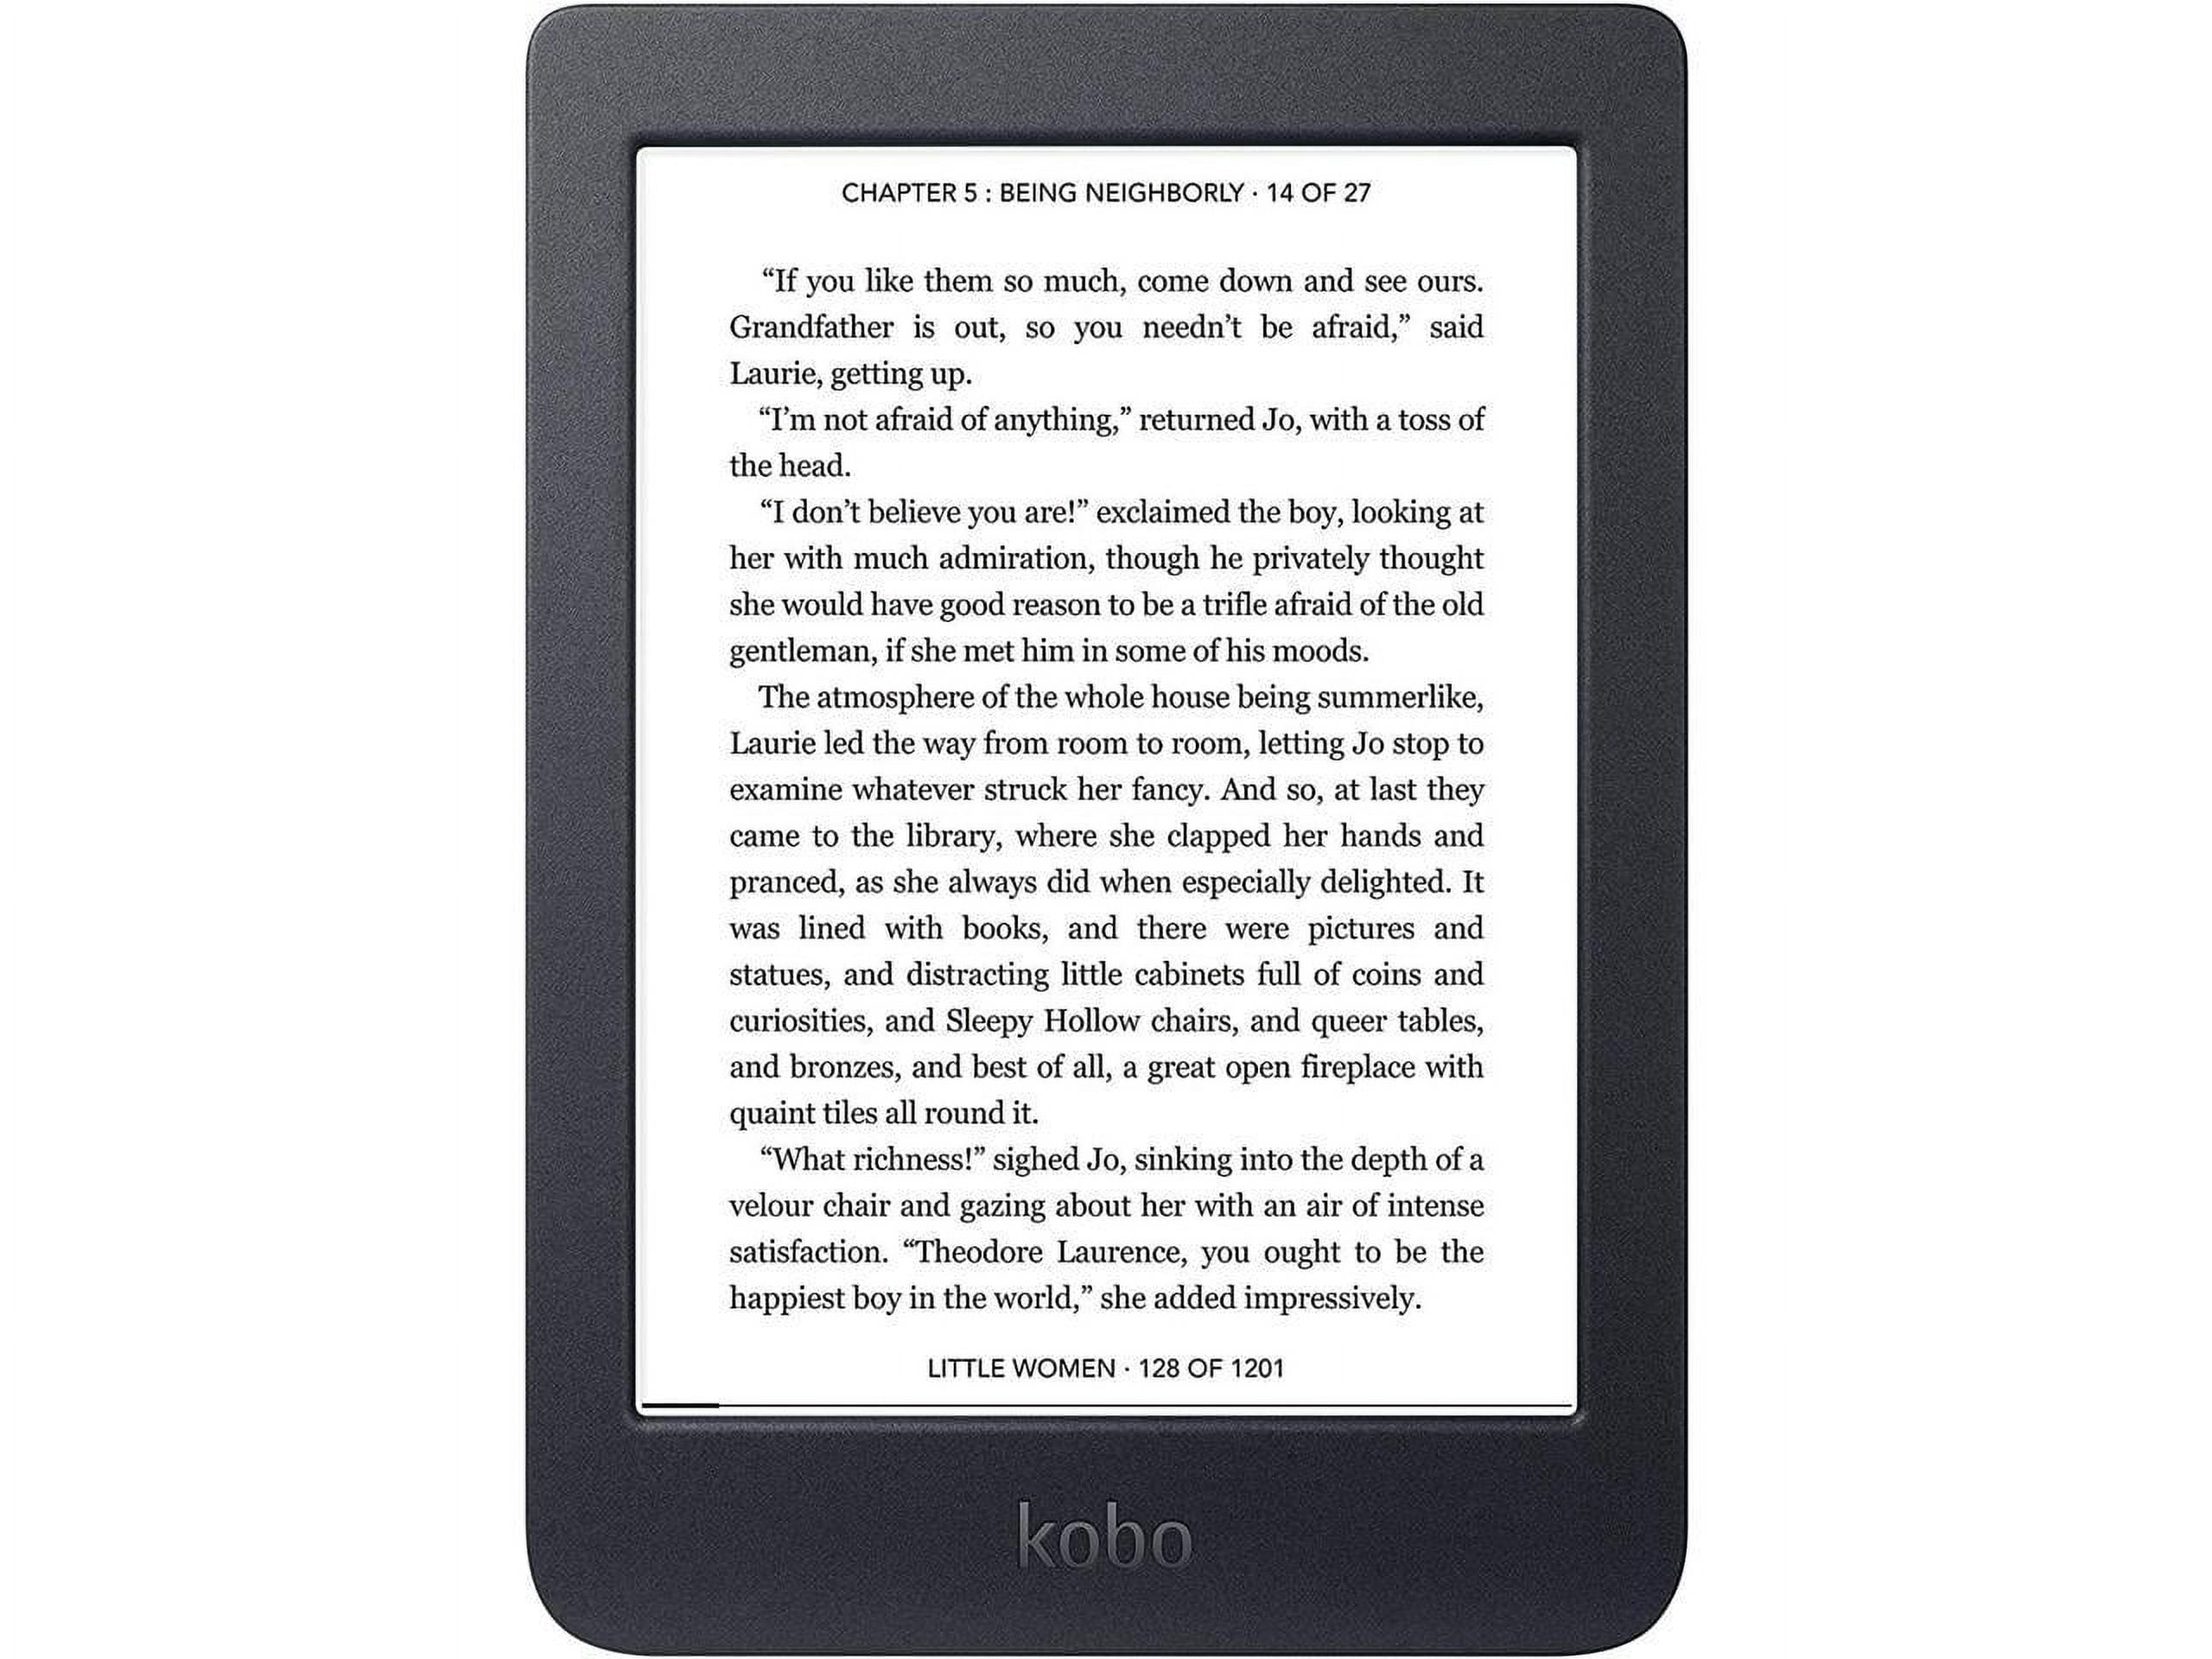 Kobo introduces the lackluster Nia to replace its budget Aura e-reader